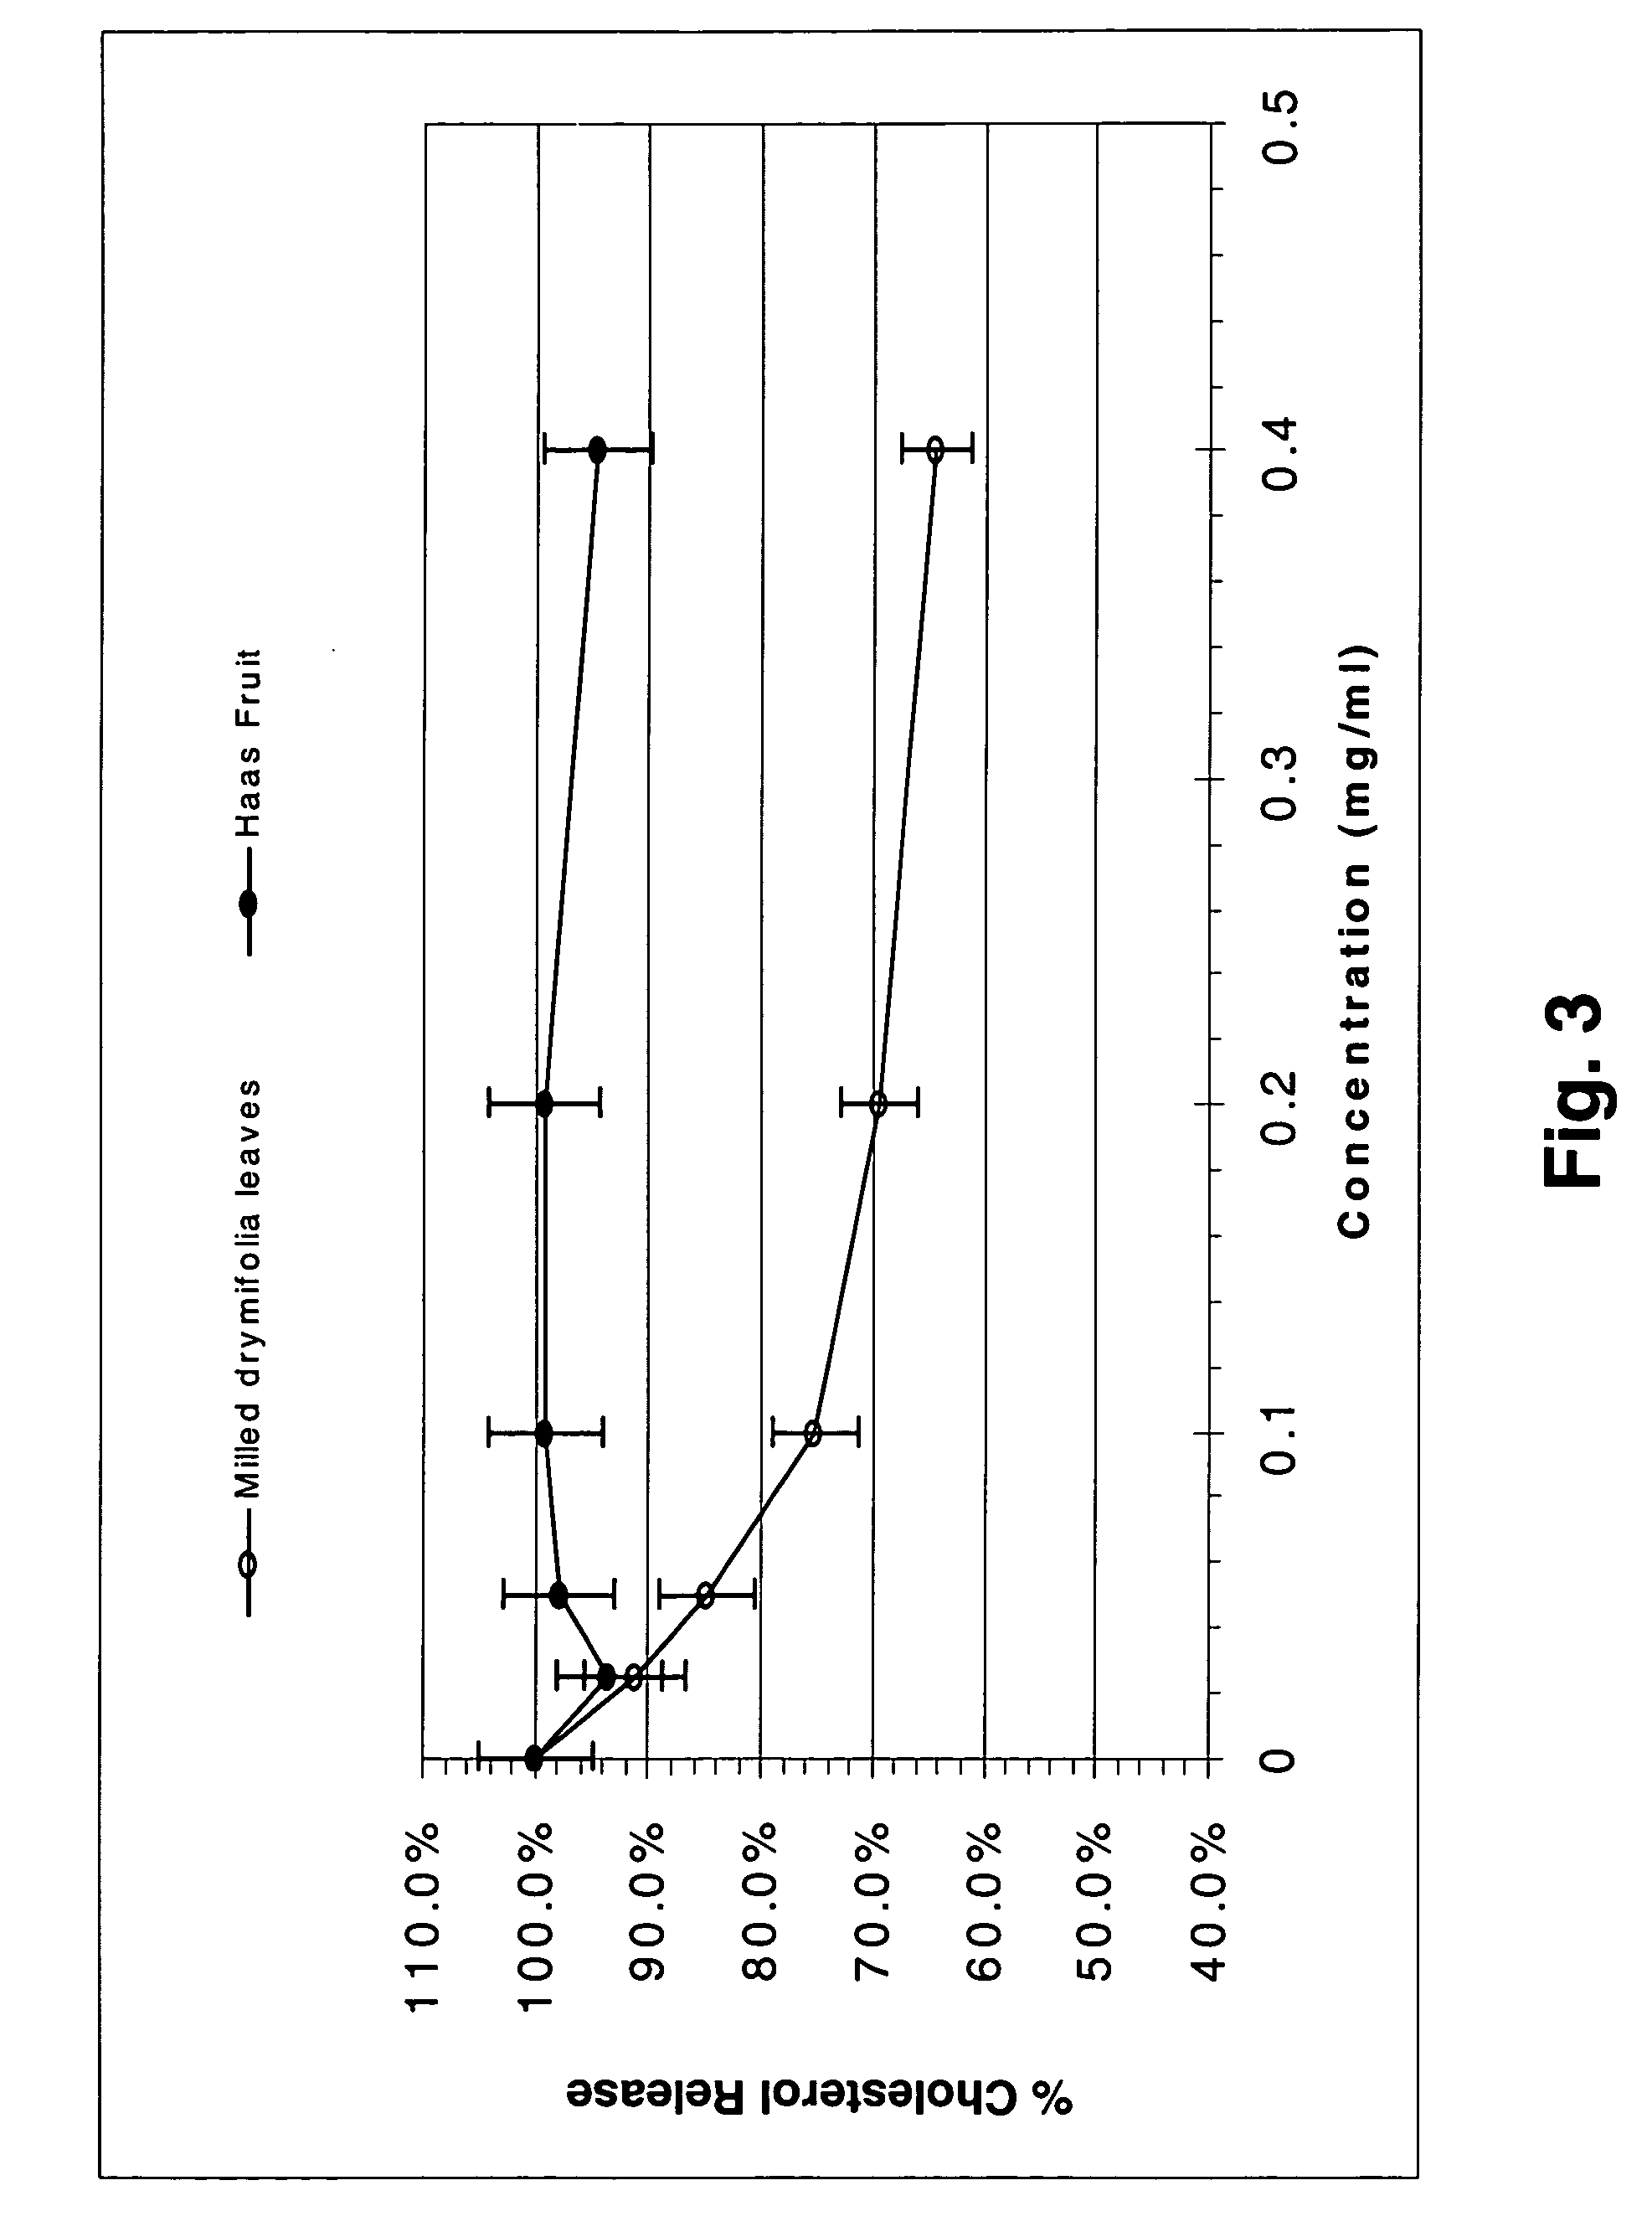 Compositions containing avocado leaf extract for lowering cholesterol levels